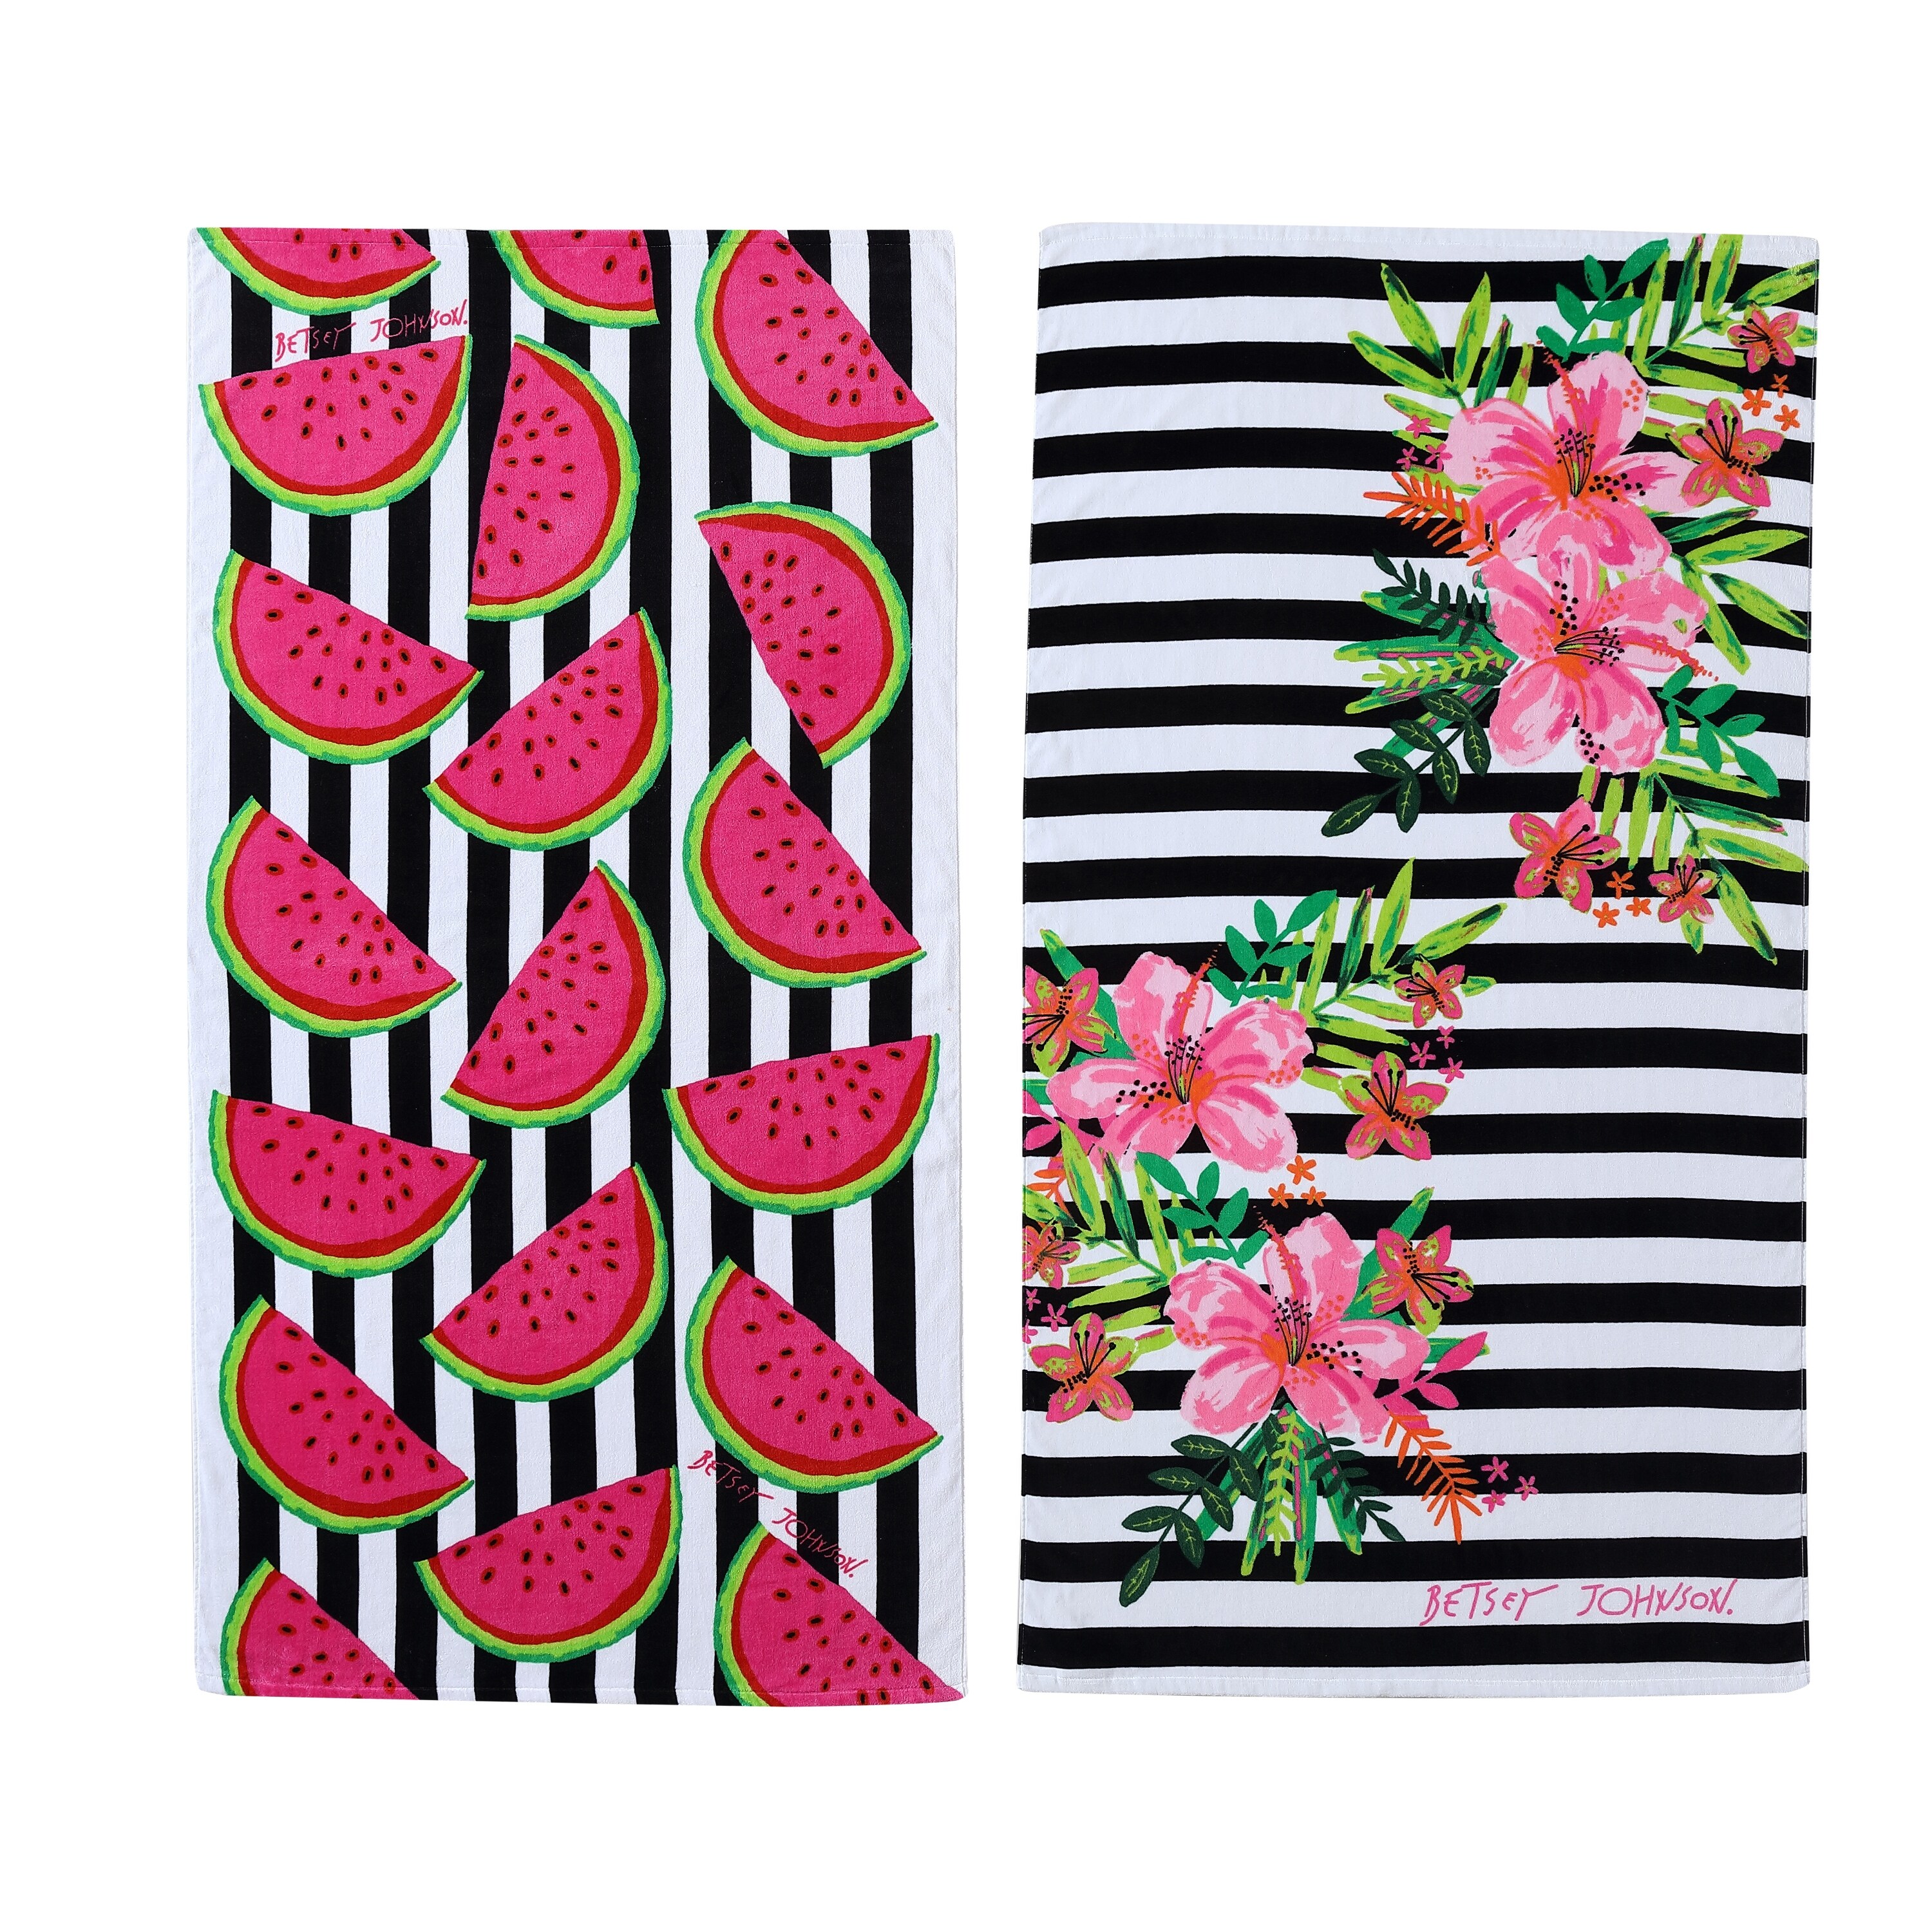 Details about   BETSEY JOHNSON SKULLS STRIPES BEACH POOL TOWEL AND MAT SET BLACK AND BLUE NWT 